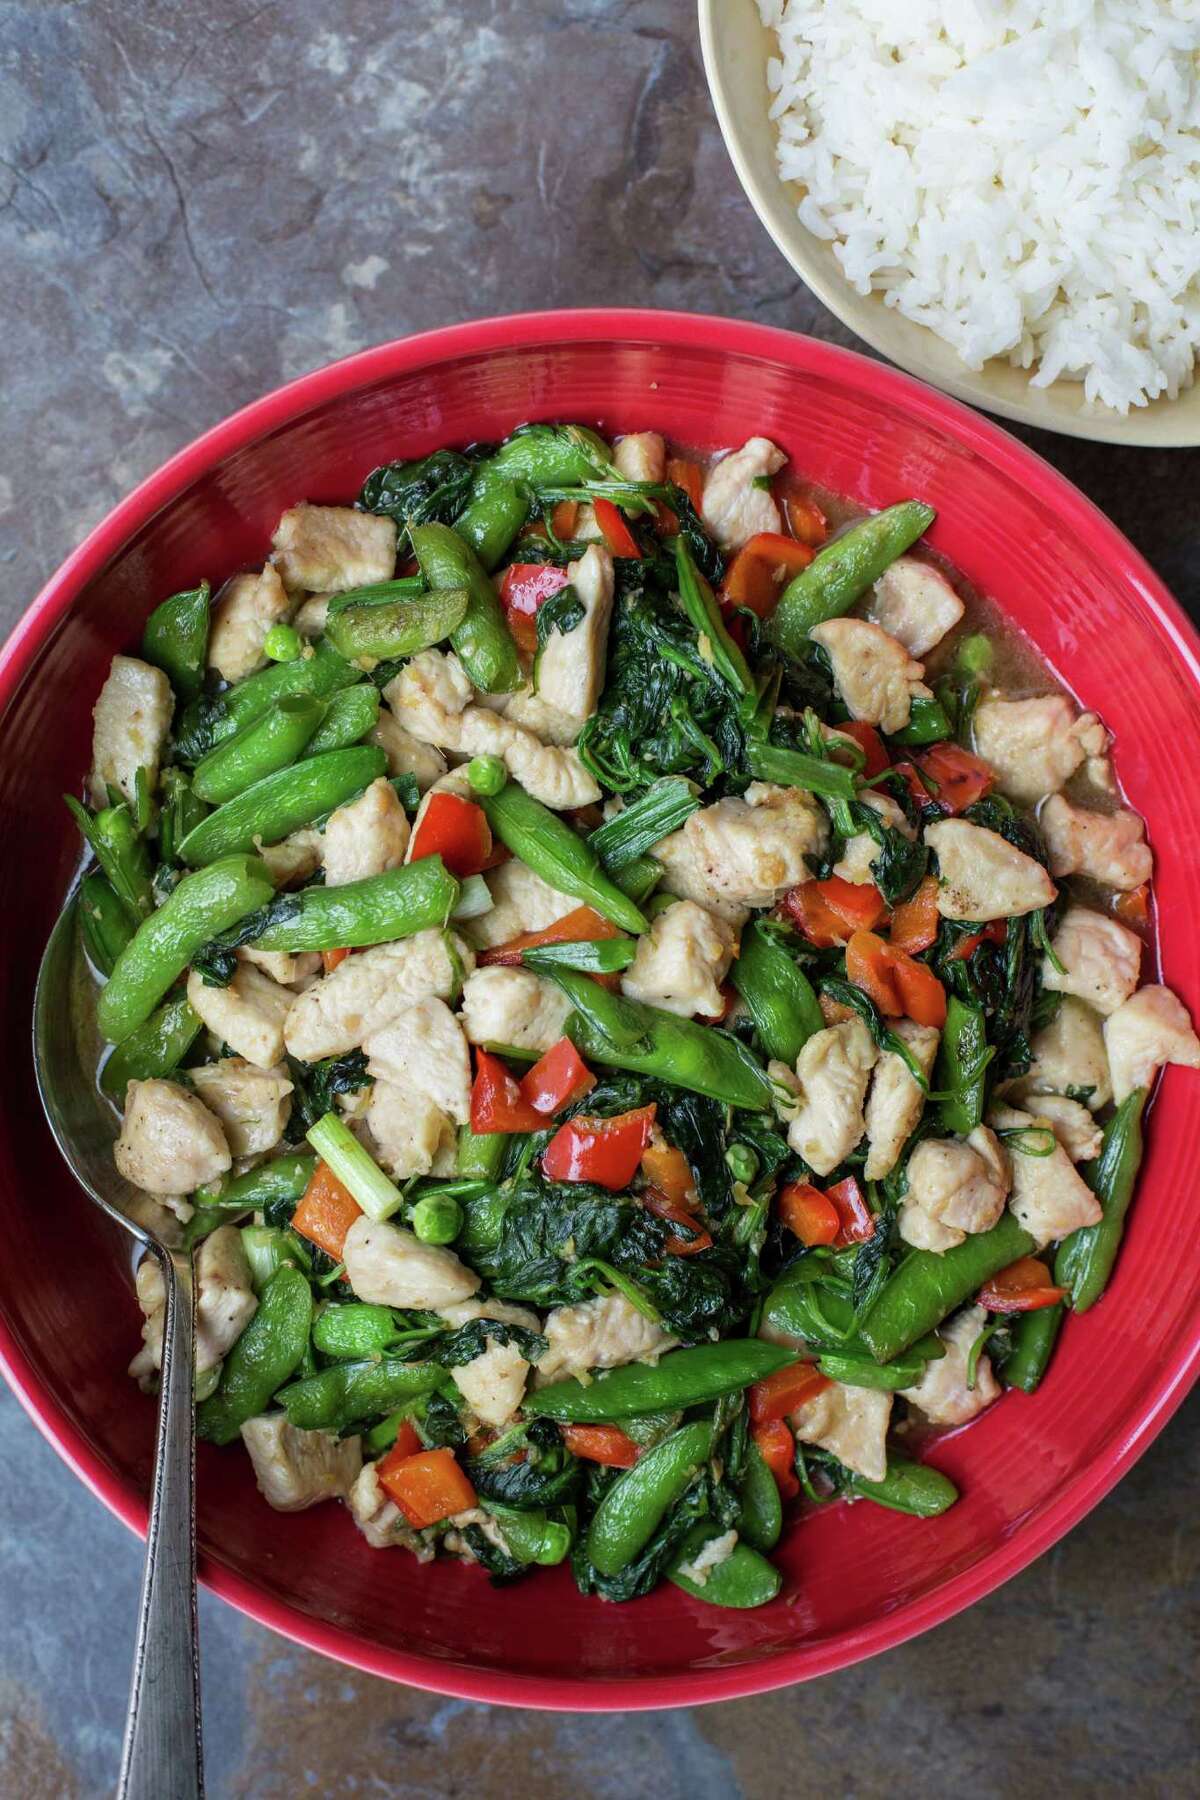 Chicken and Vegetable Stir-Fry takes 35 minutes start to finish.